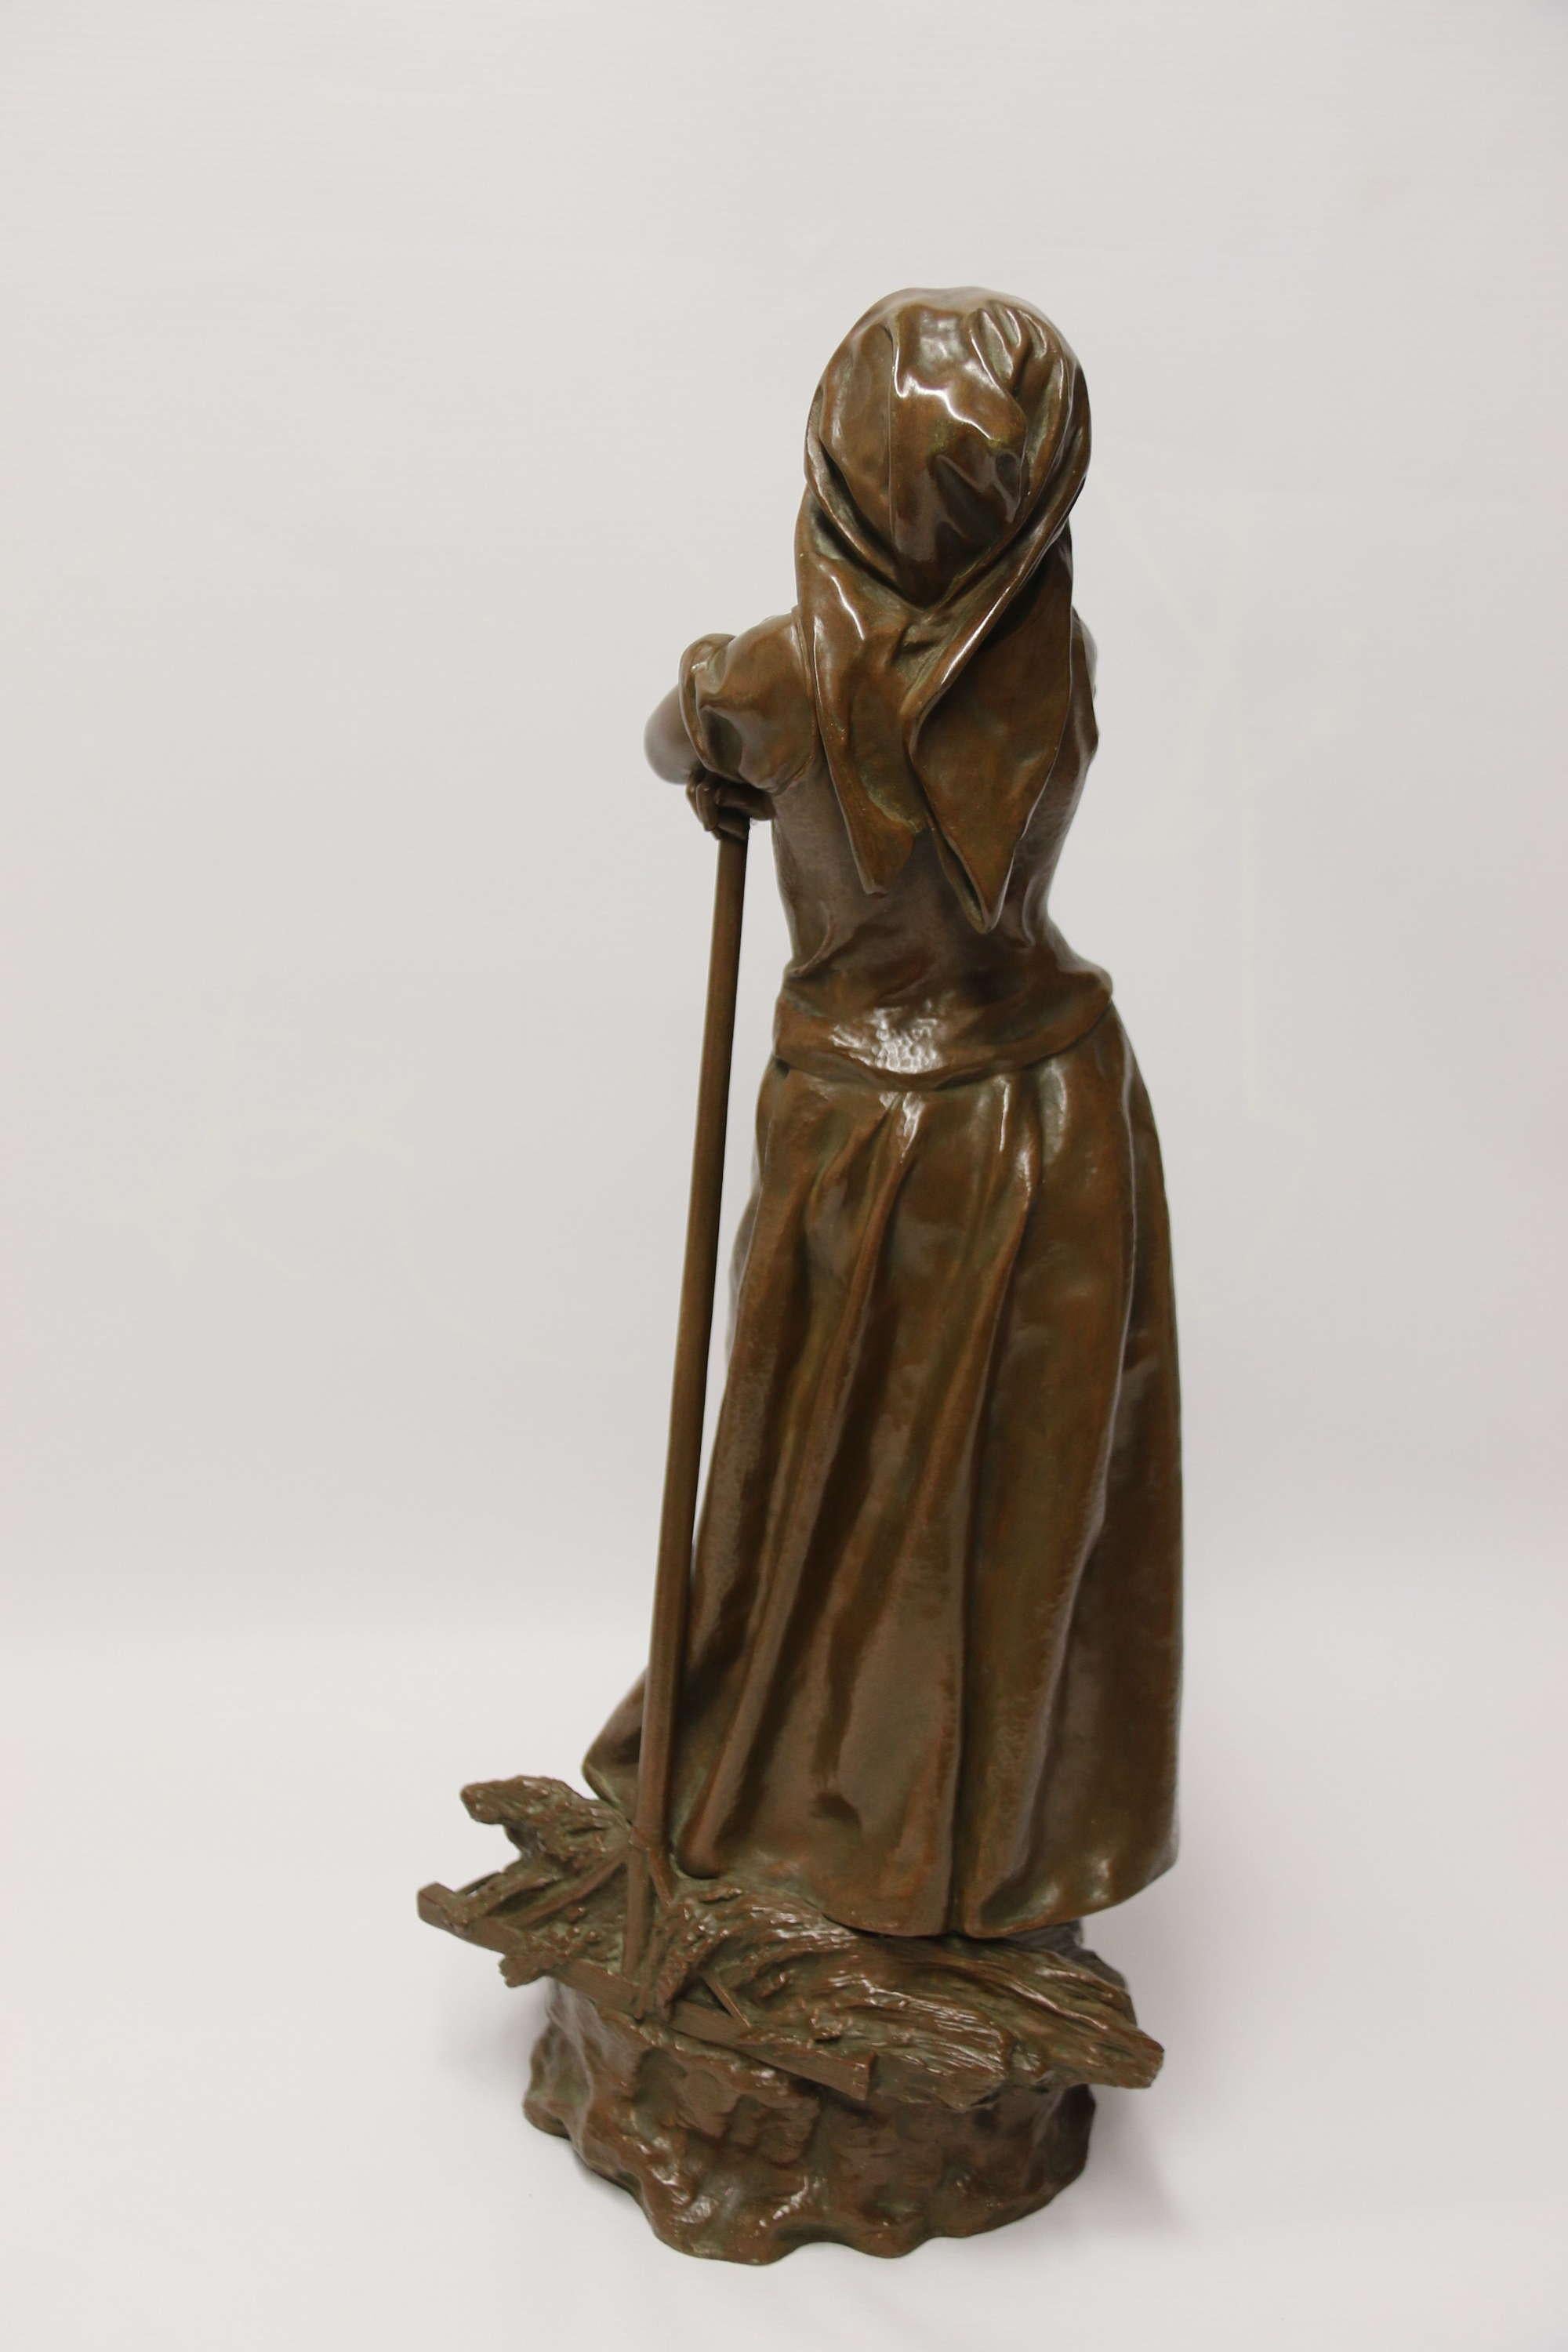 19th Century Bronze Sculpture of a Young Female Gathering Hey

This superb 19th century large bronze figure was produced at the highly acclaimed French foundry Bronze Garanti Au Titre L. V Depossee and it bears their stamp and registration number.